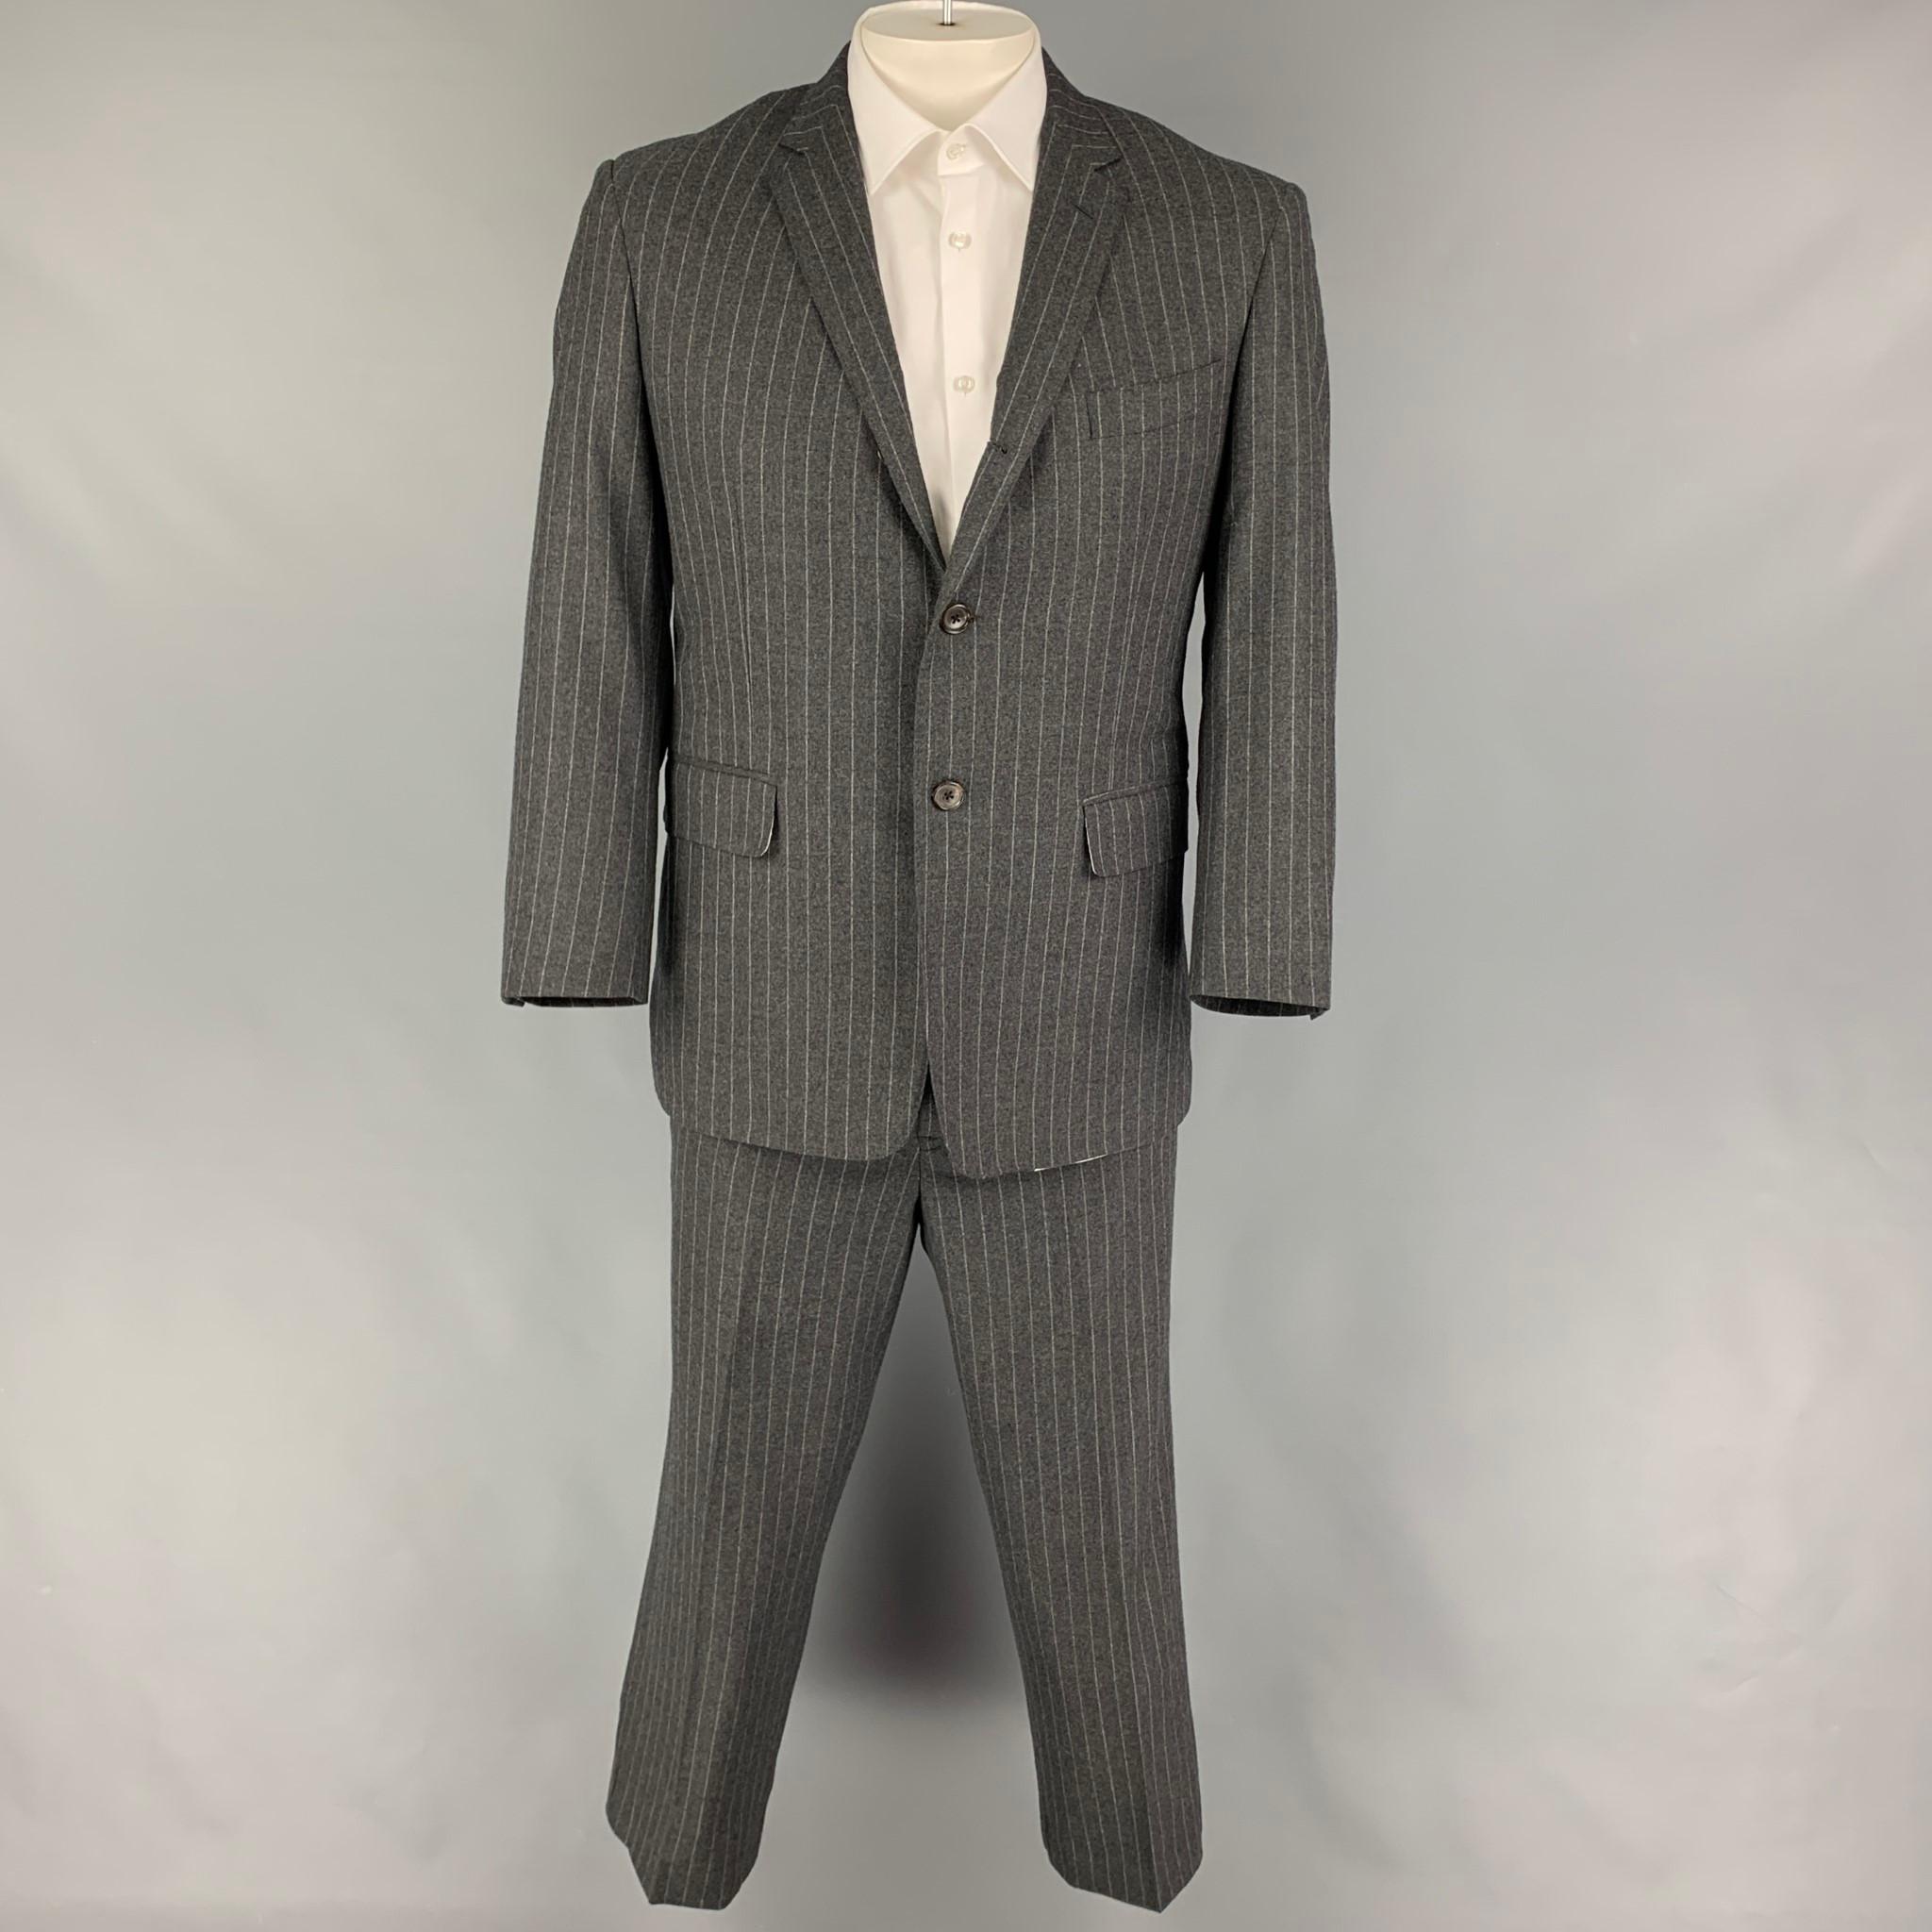 BLACK FLEECE suit comes in a dark gray stripe wool and includes a single breasted, three button sport coat with a notch lapel and matching flat front trousers. Made in USA.

Very Good Pre-Owned Condition.
Marked: 42

Measurements:

-Jacket
Shoulder: